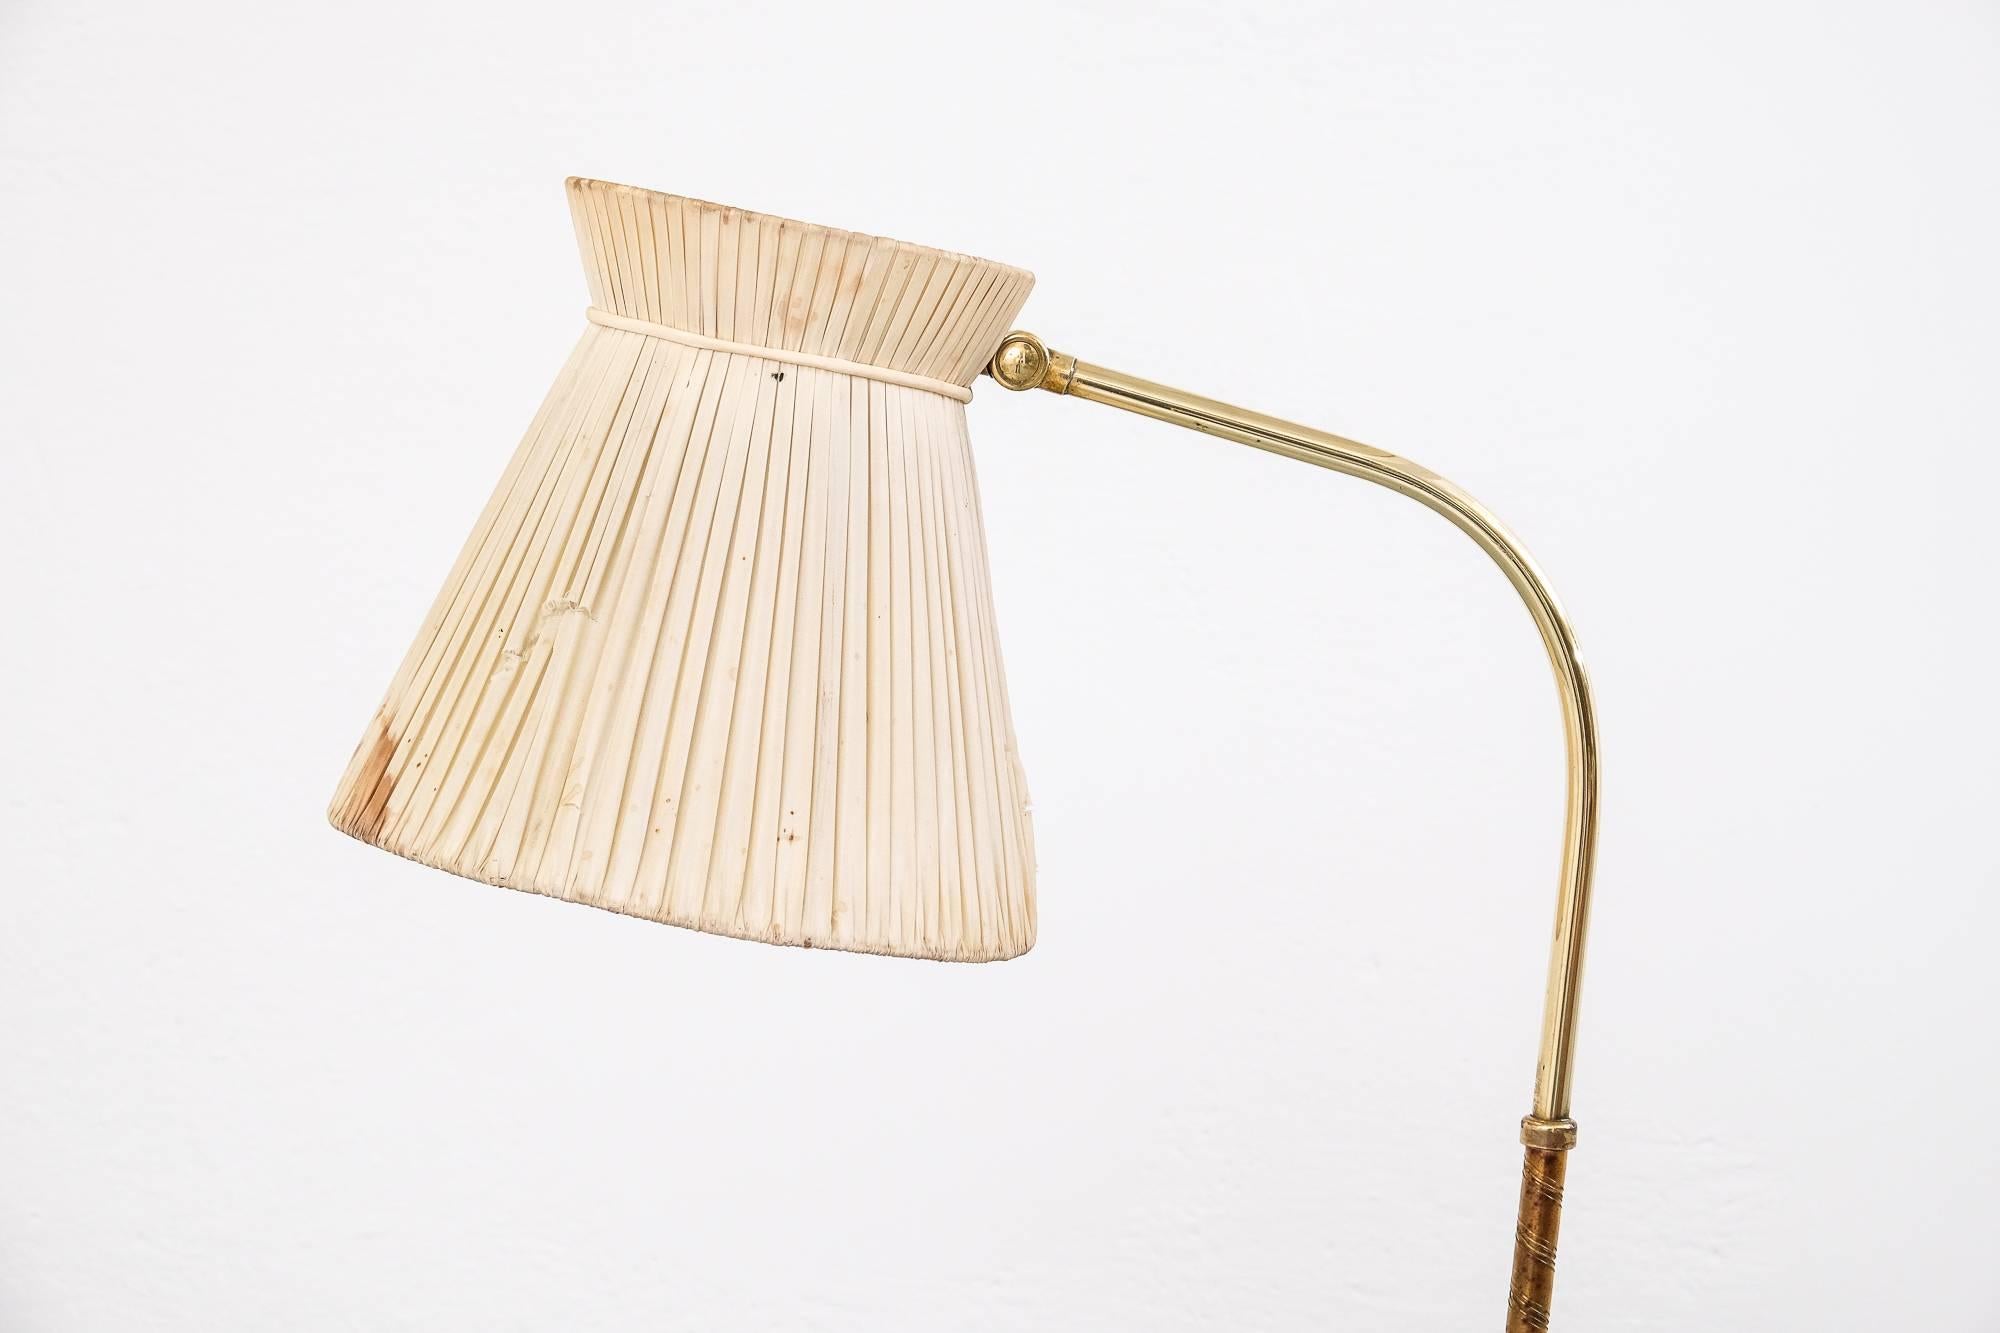 A Lisa Johansson-Pape model 2063 floor lamp for Orno Oy, Finland. The lamp has a curved brass frame, partially wrapped in plastic ribbon. It has an adjustable hood with an original pleated fabric shade and a plexiglass diffuser on top. Marked by